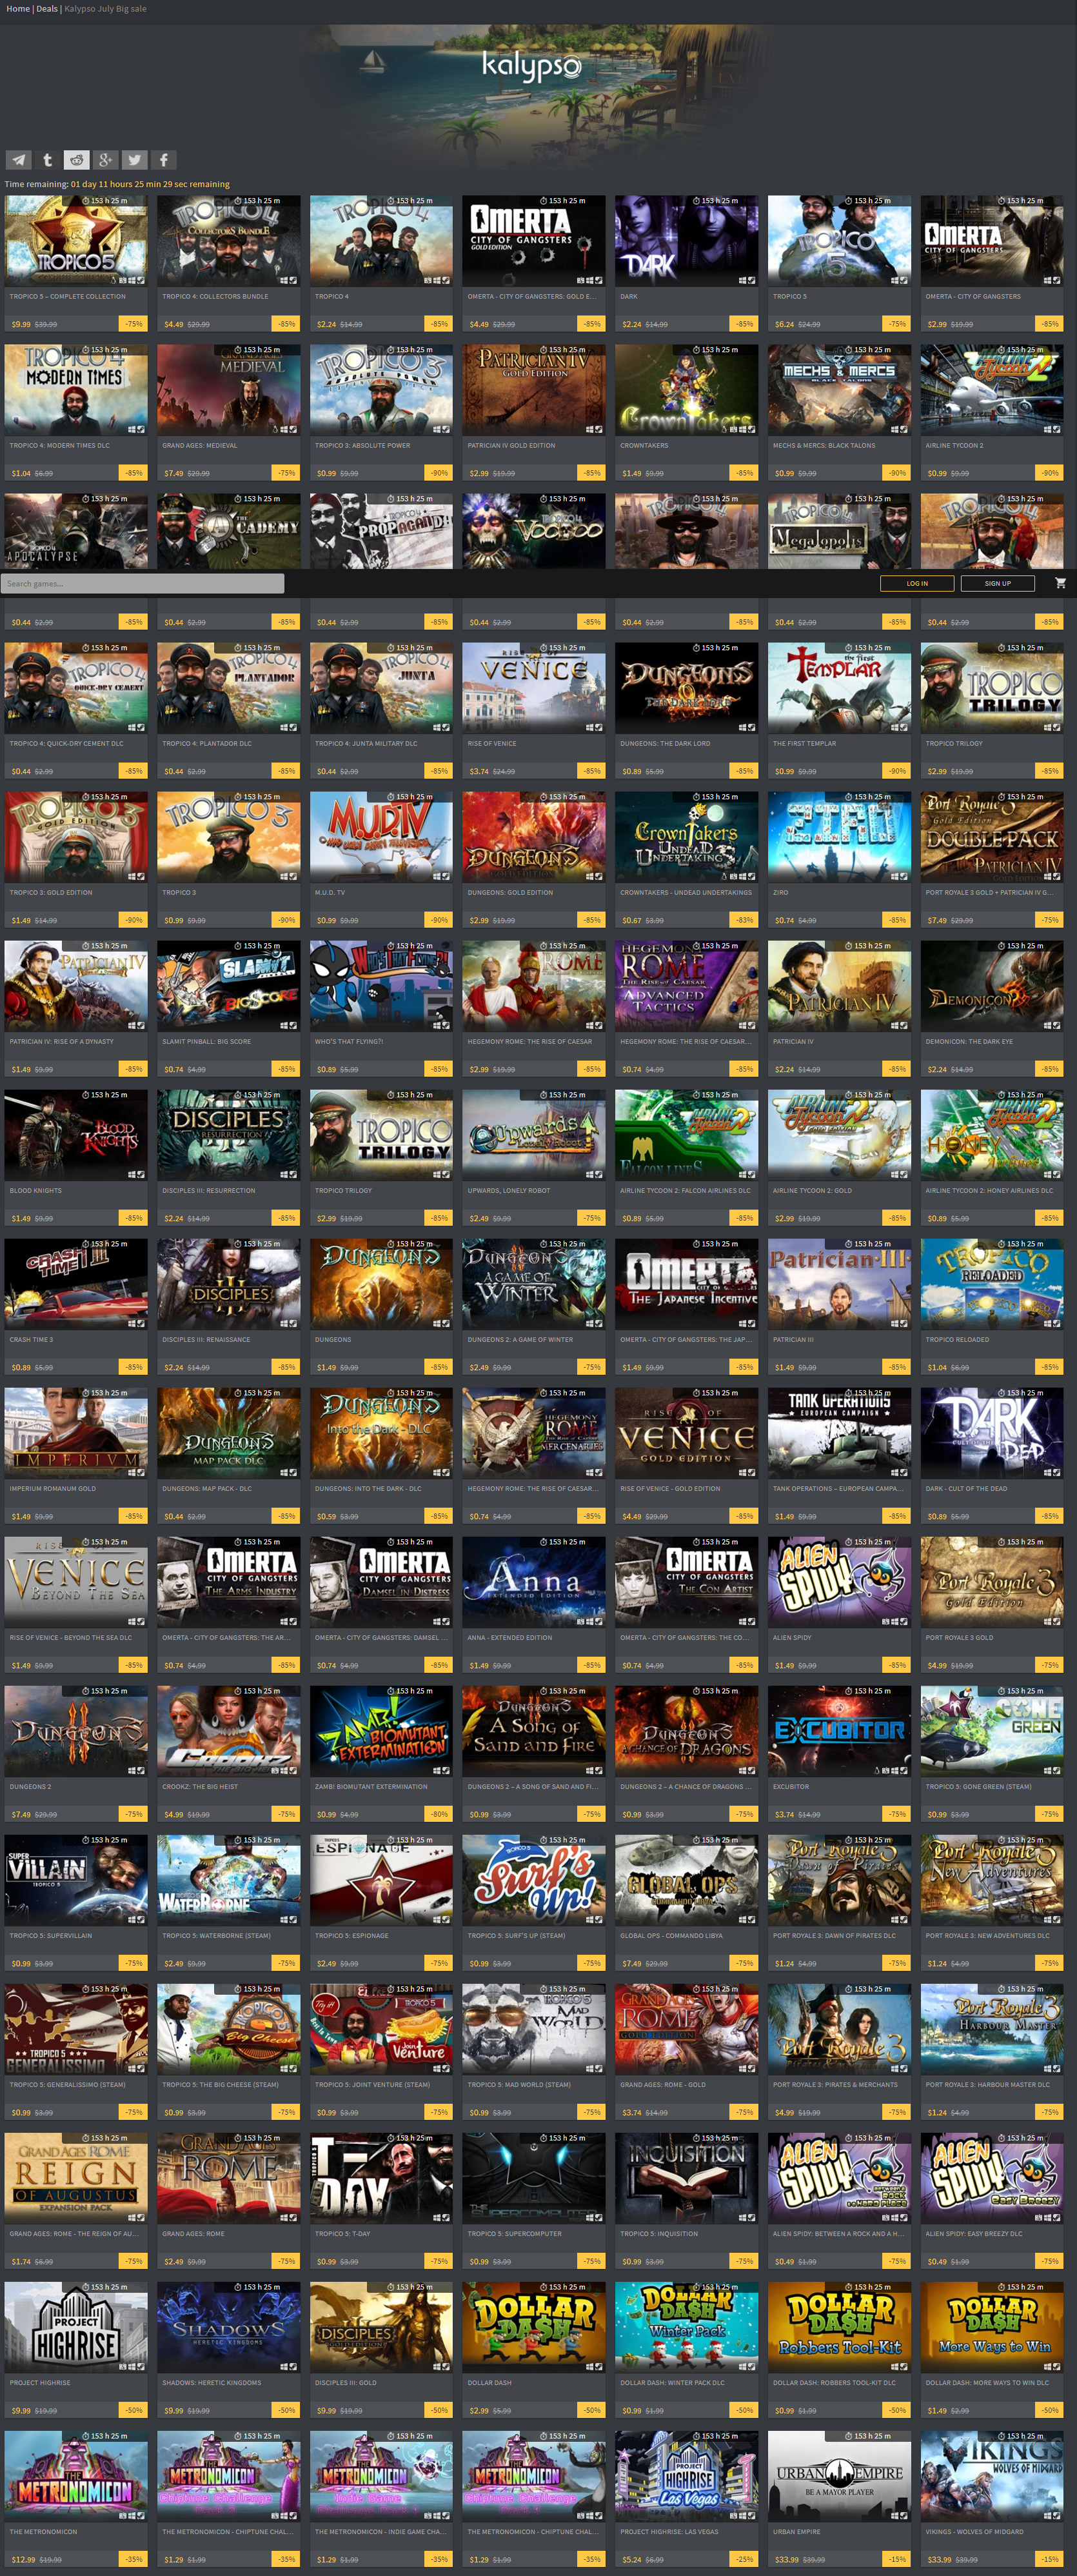 Cheap PC games, game deals up to 75% off _.png